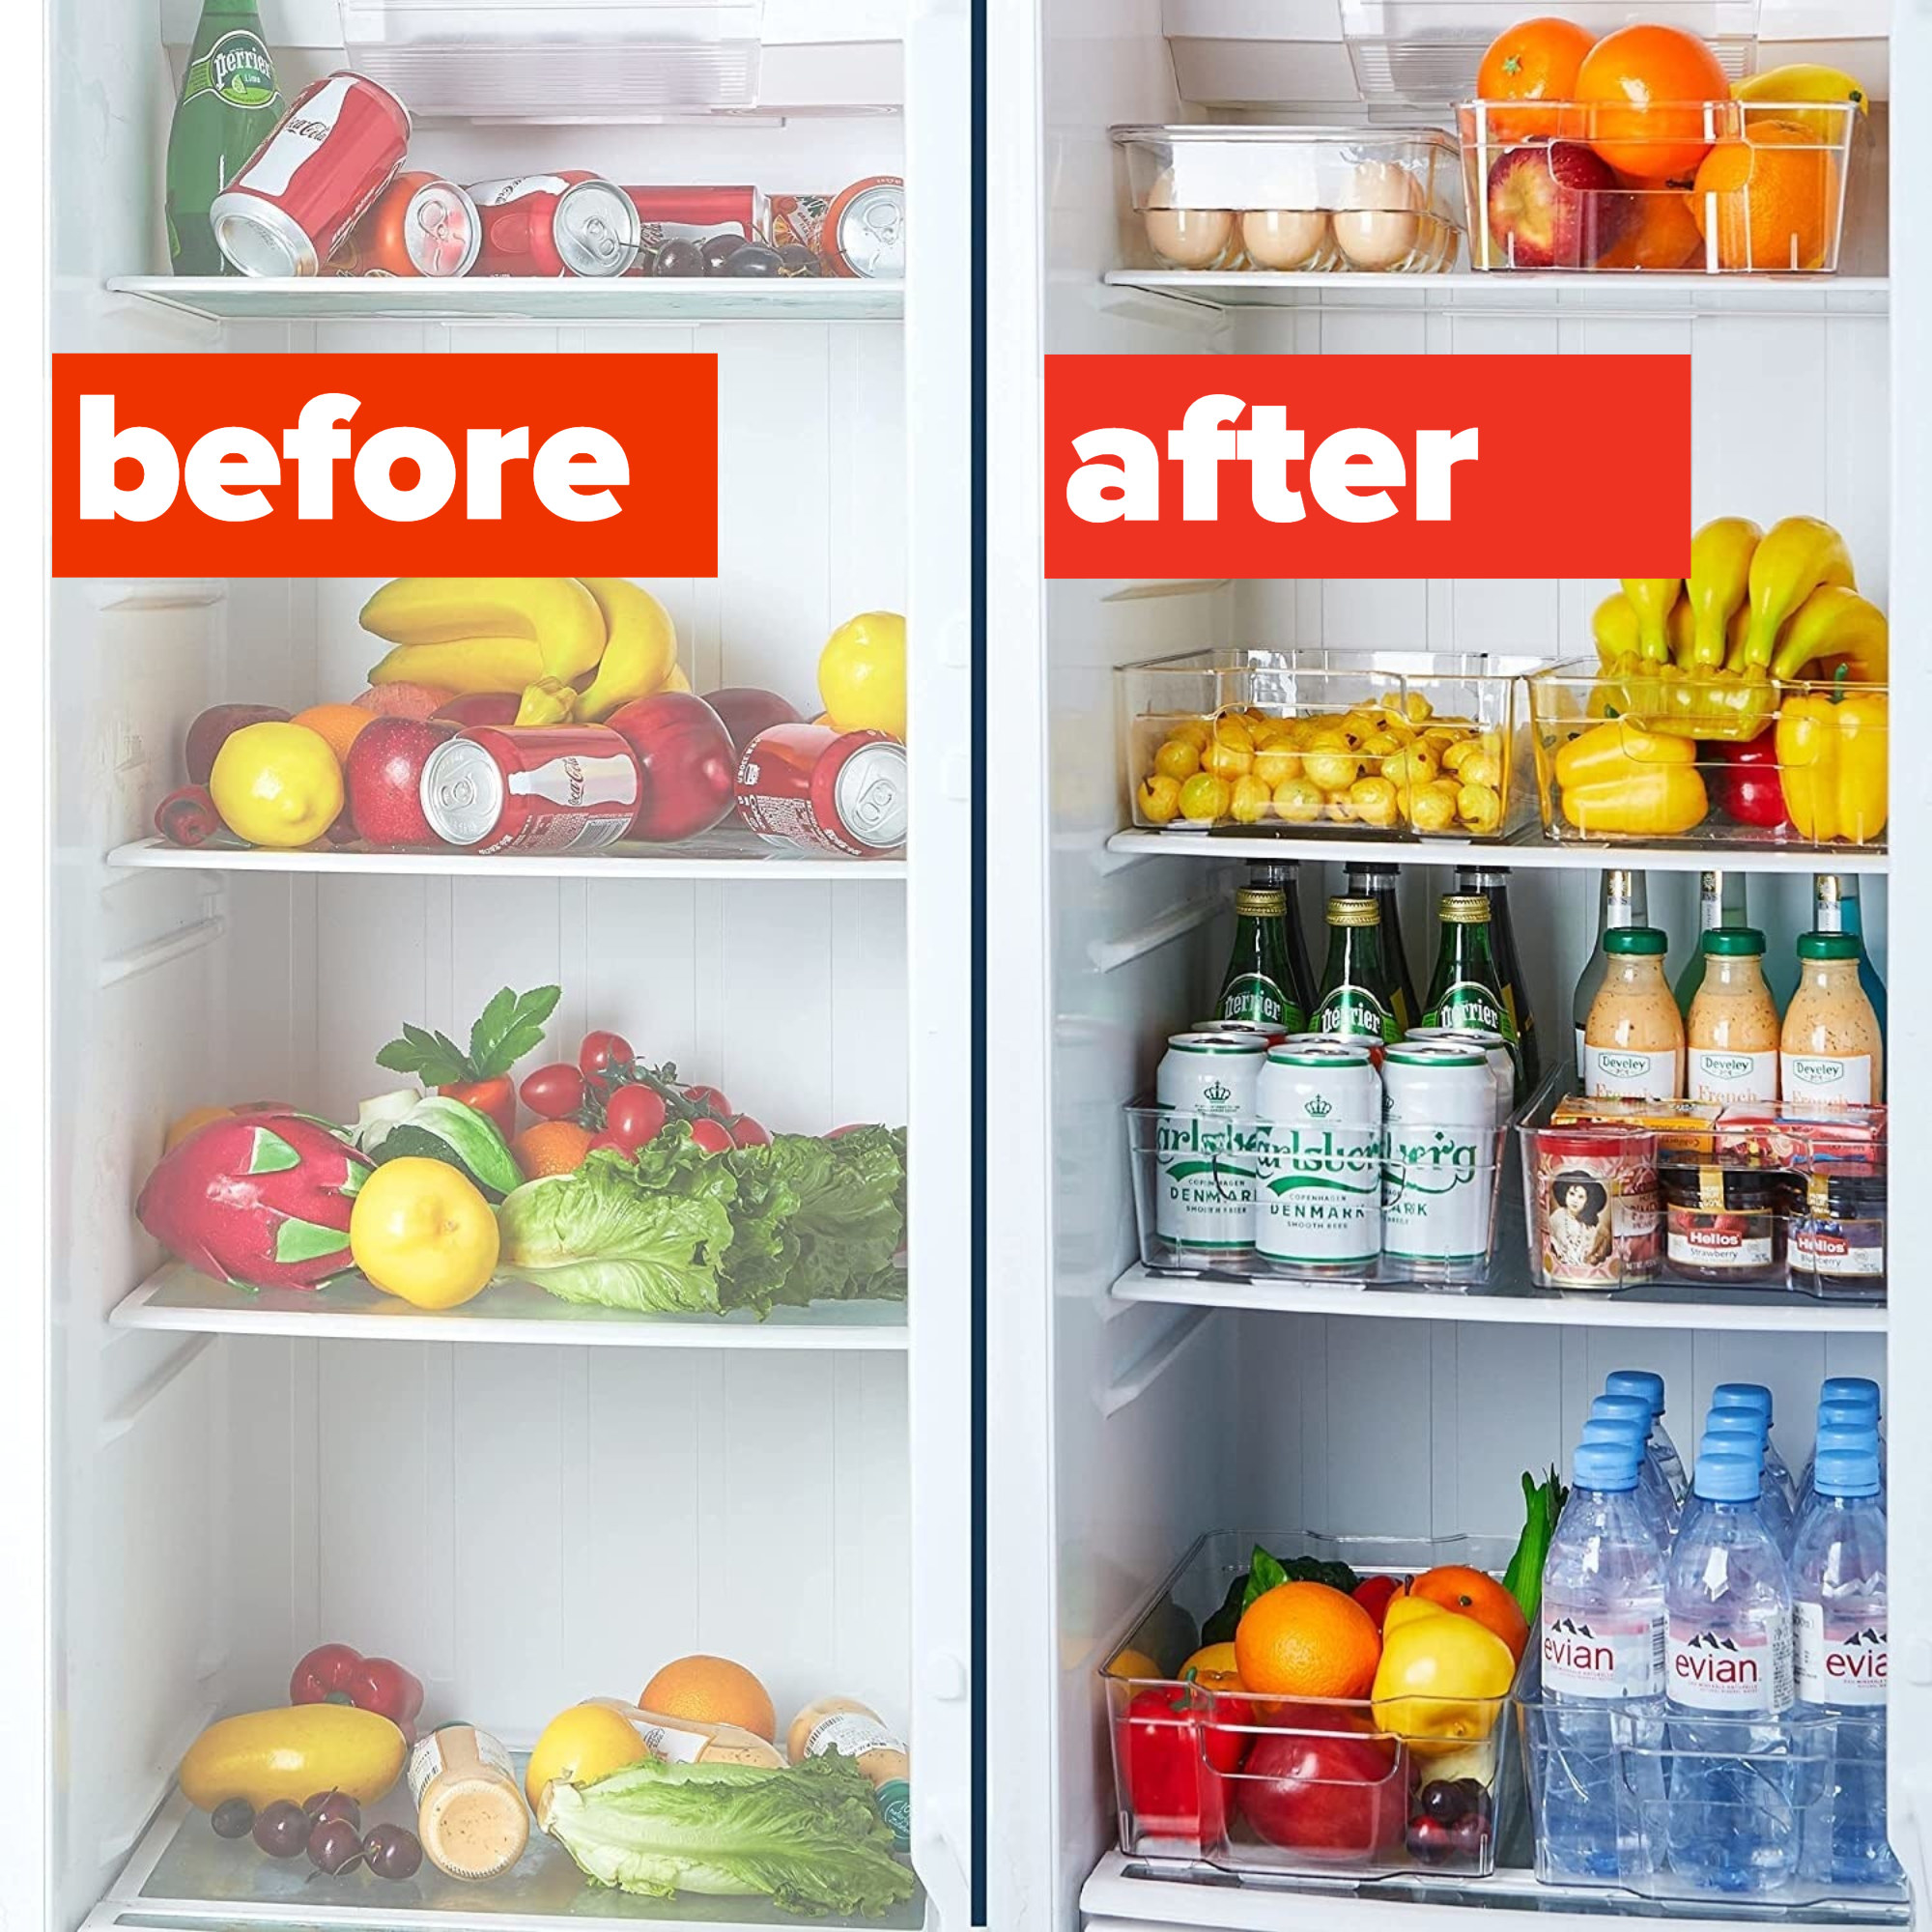 A before and after of a fridge organized with the bins